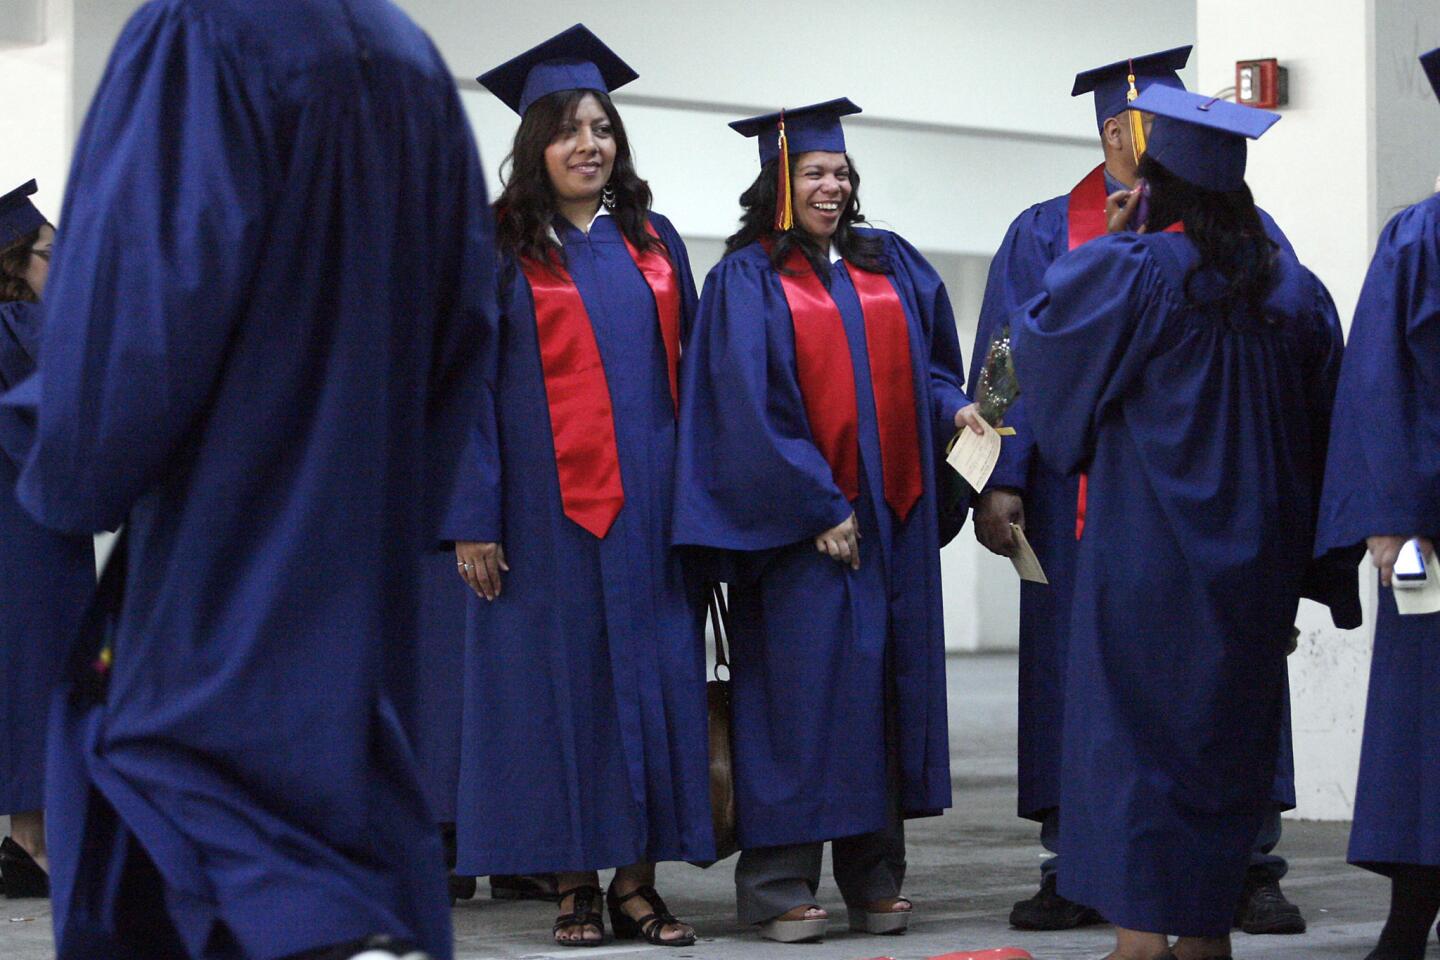 PCC's 87th annual commencement day